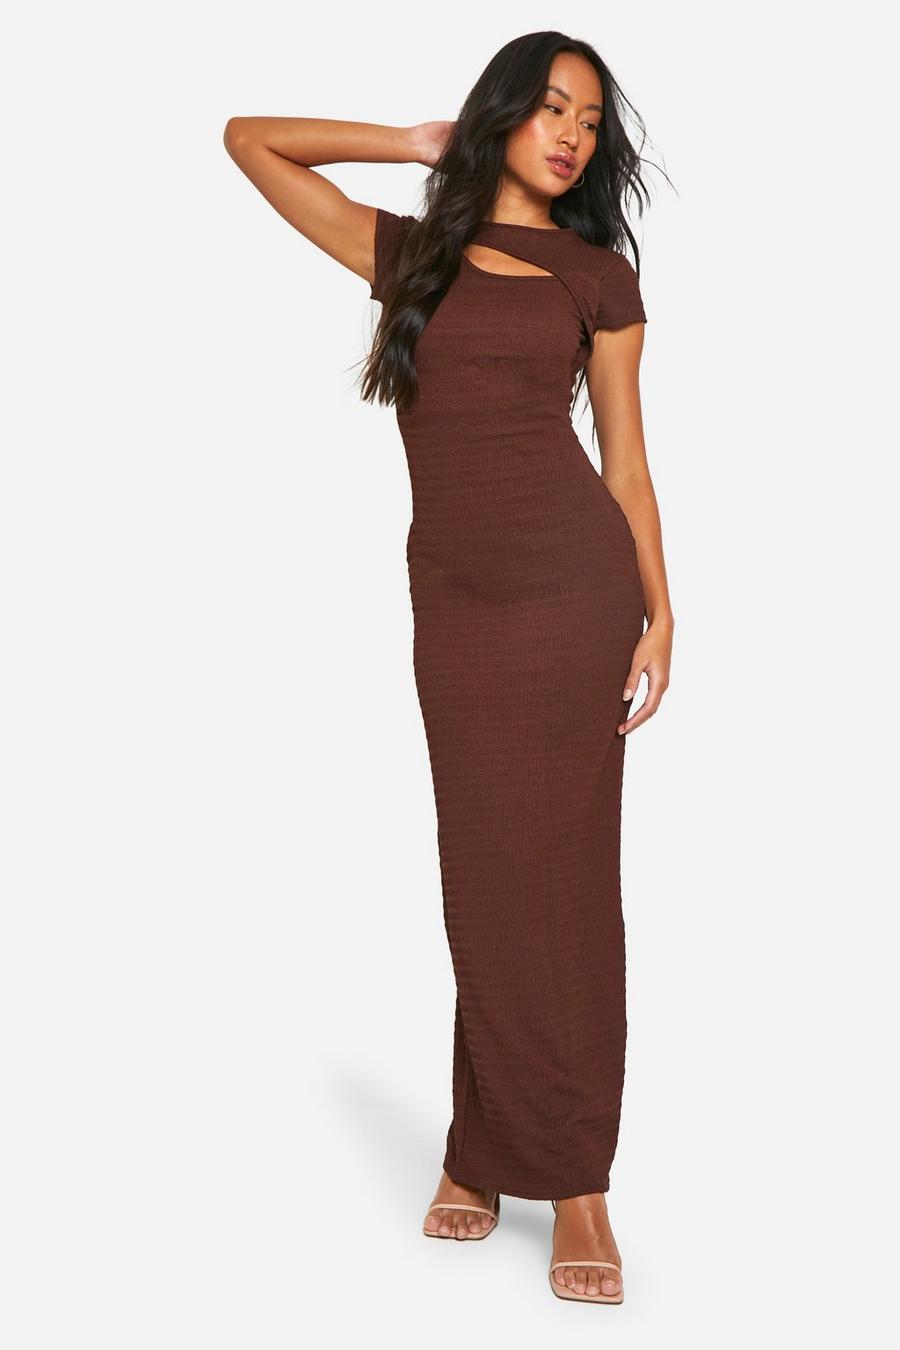 Chocolate Textured Cut Out Maxi Dress image number 1